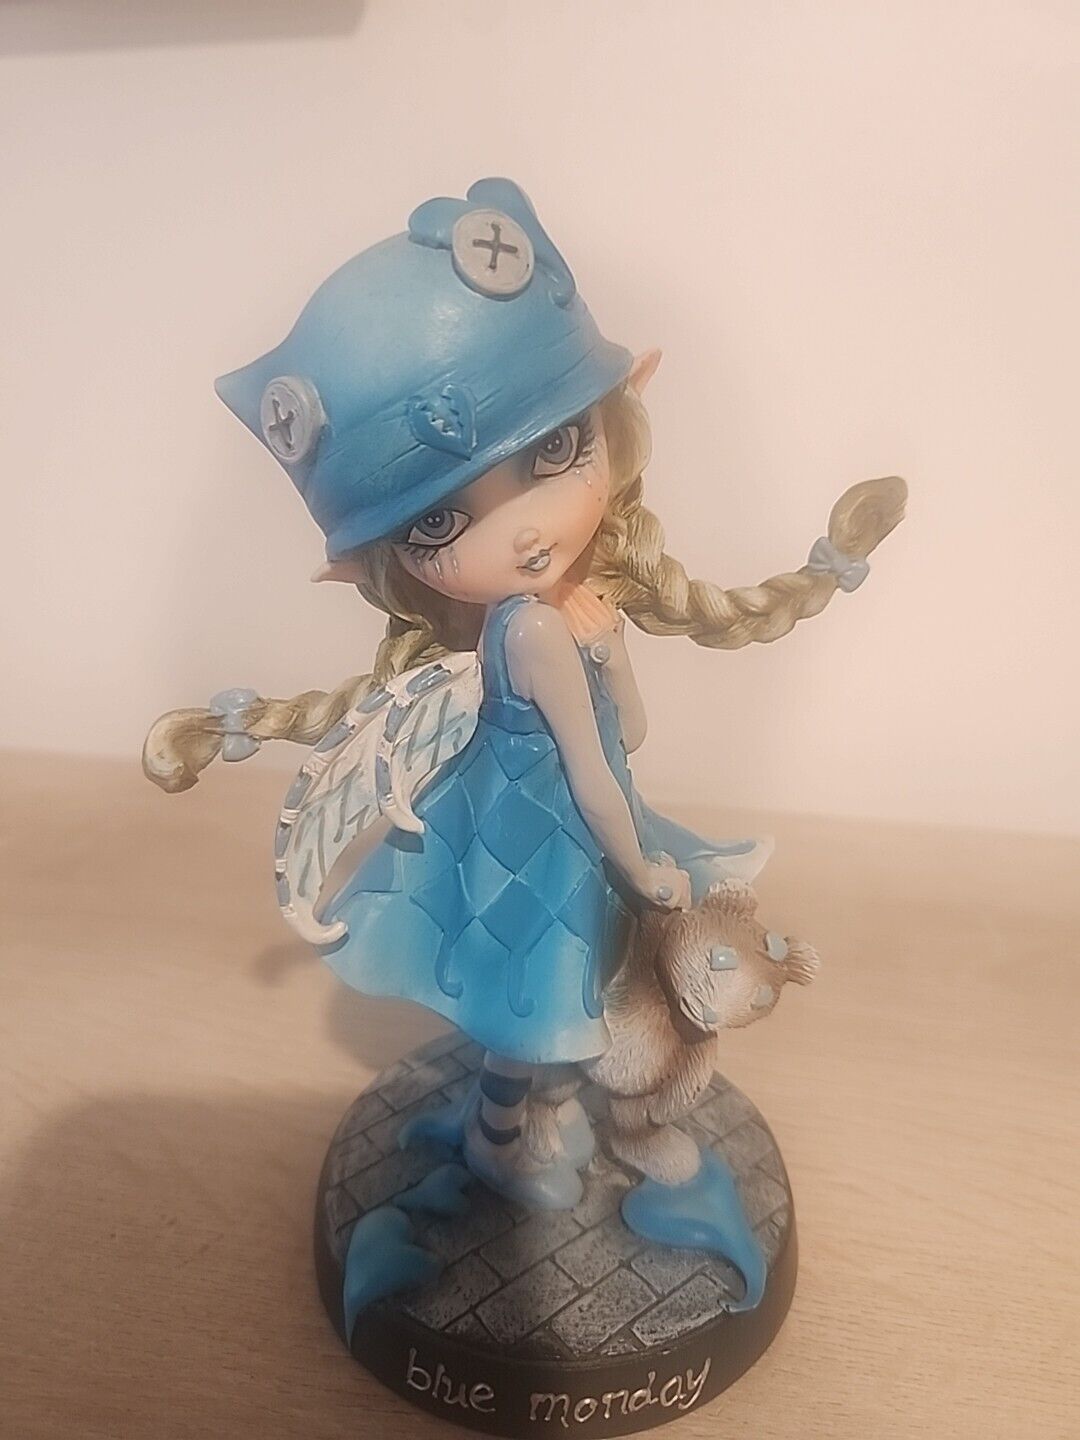 Dolly Fae BLUE MONDAY fairy figurine & Teddy Bear Pacific Giftware